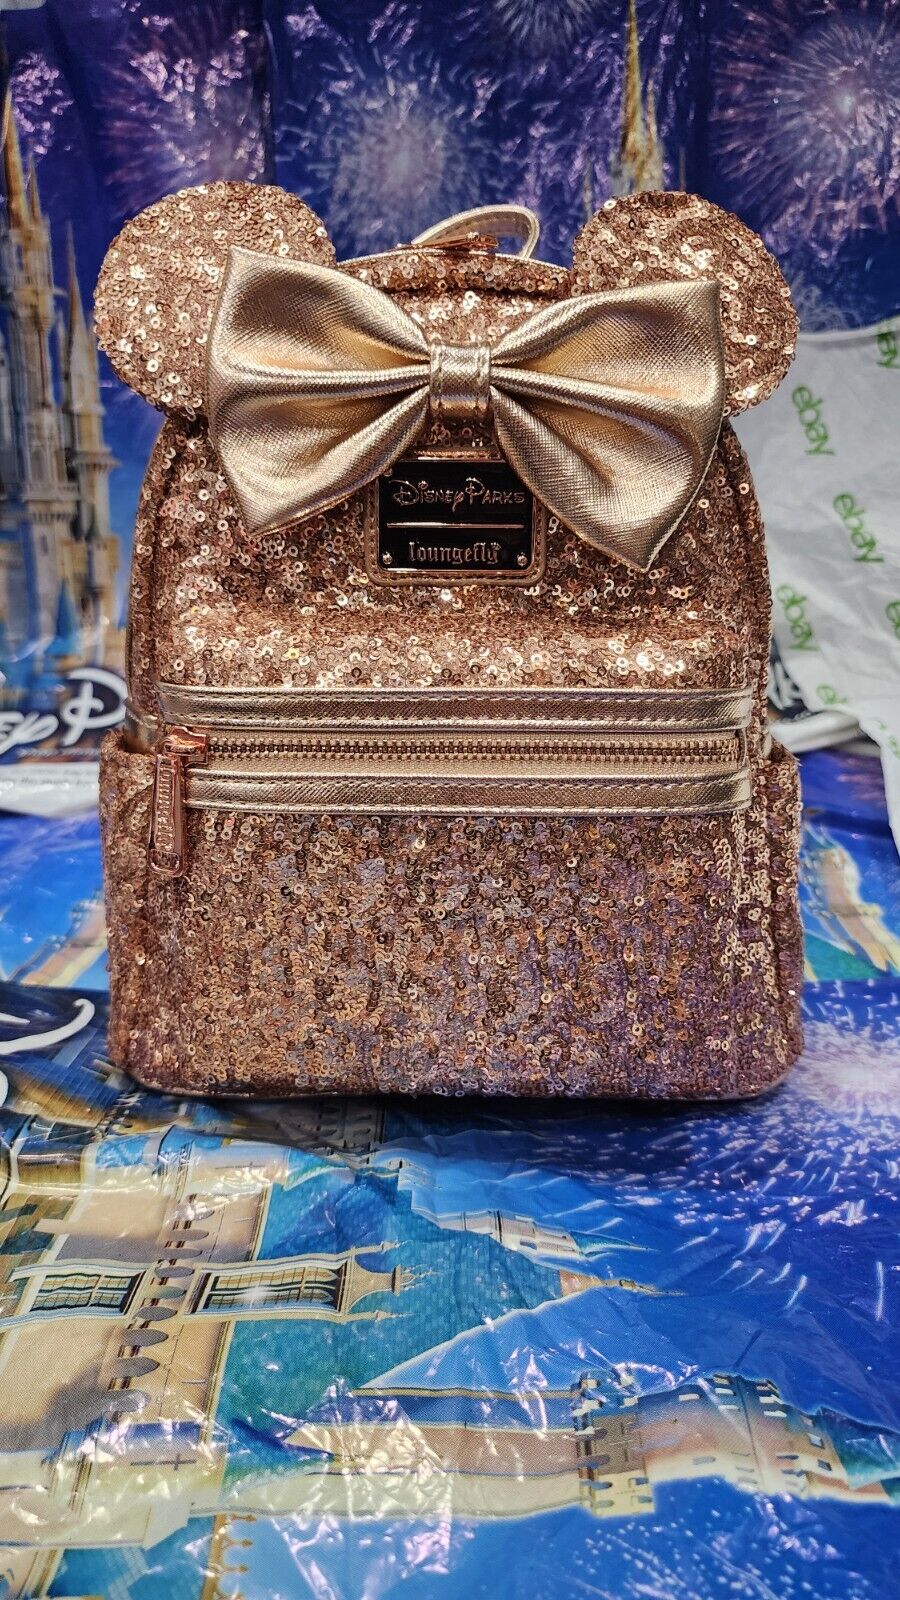 2019 Disney Parks Loungefly Minnie Mouse Sequin Rose Gold Mini Backpack NWT